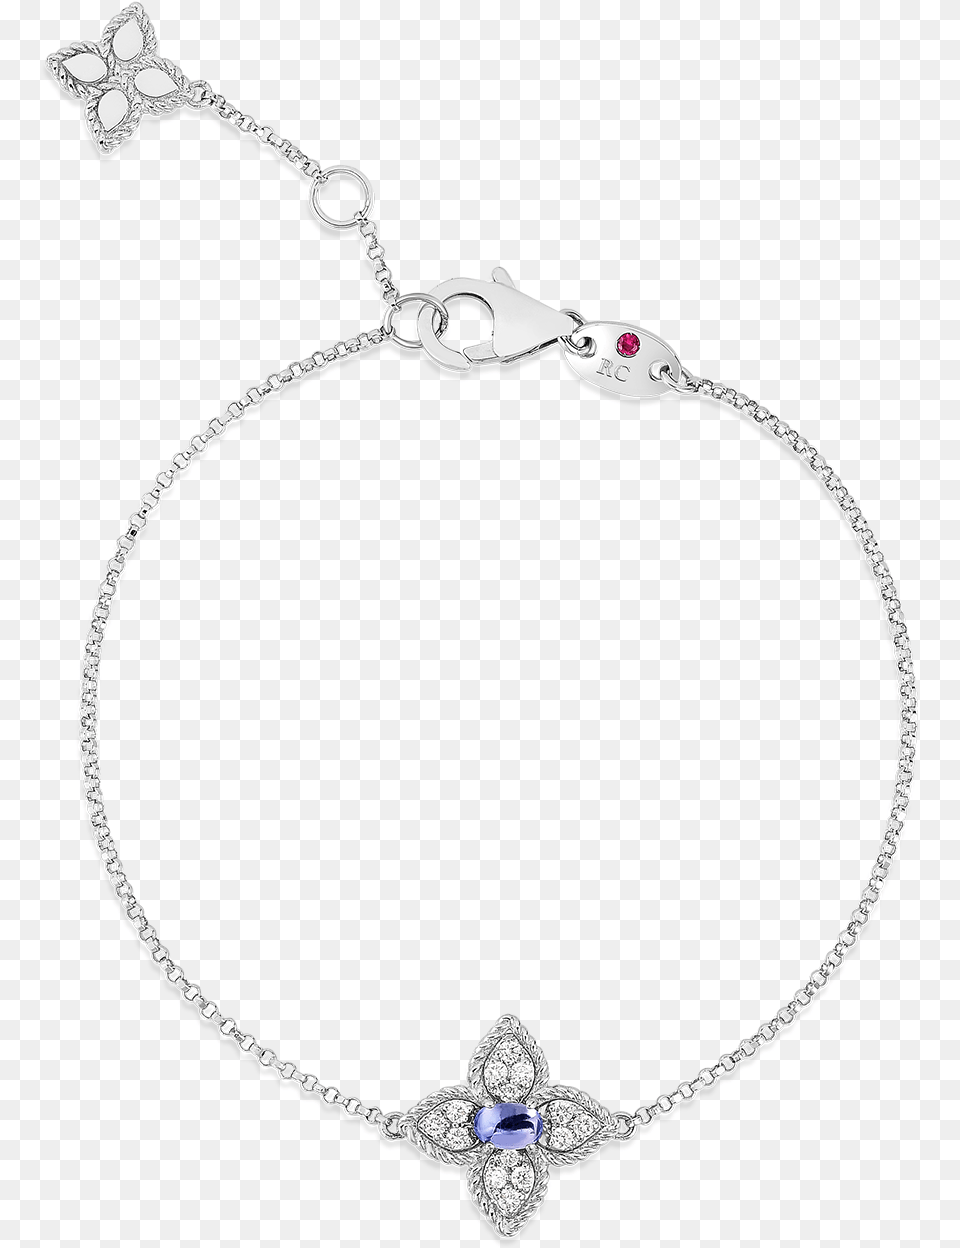 Roberto Coin Bracelet Princess Flower, Accessories, Jewelry, Necklace, Diamond Png